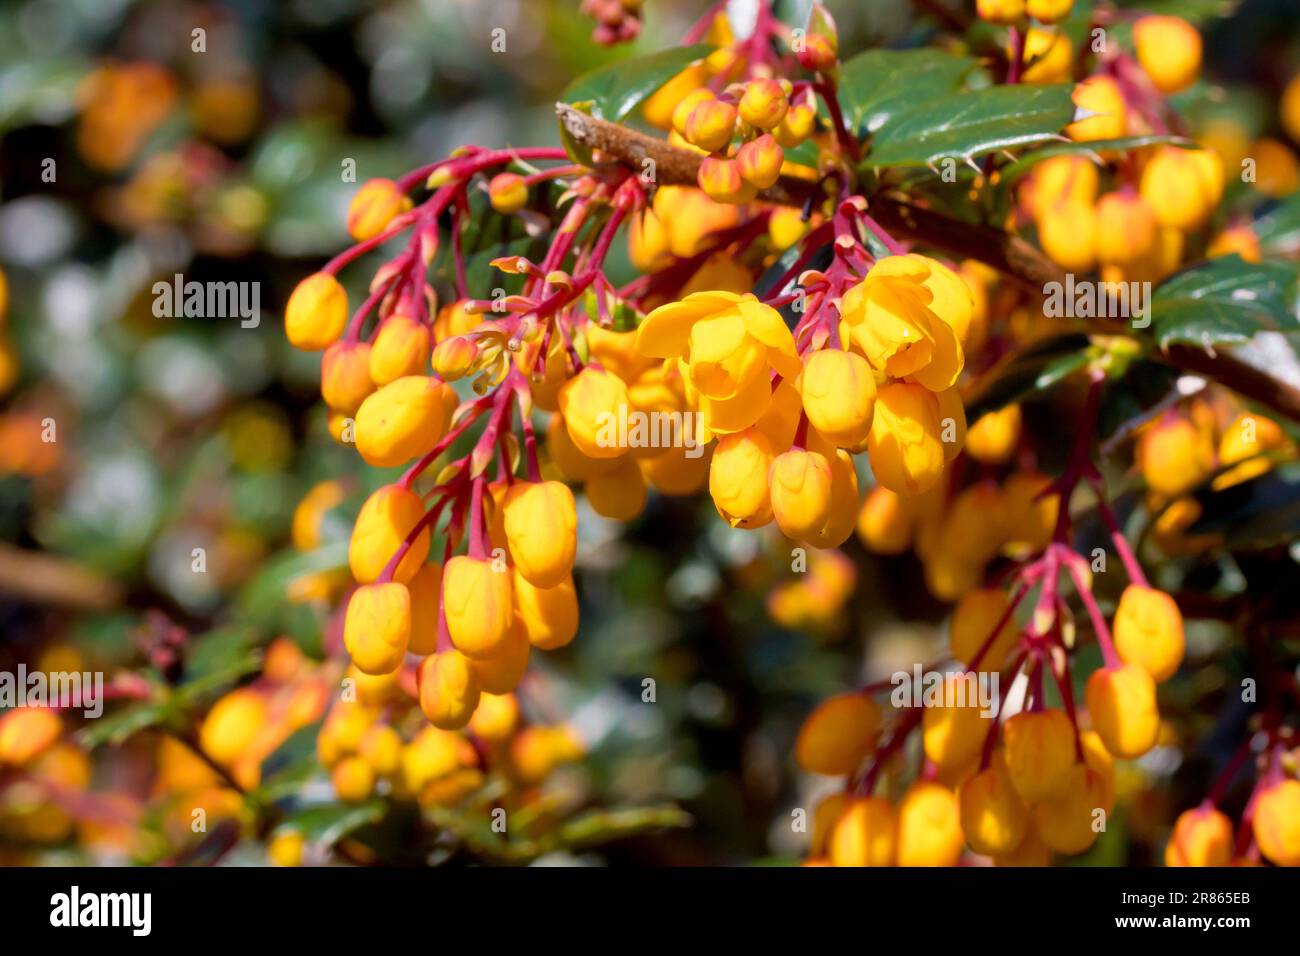 Darwin's Barberry (berberis darwinii), close of the yellow/orange buds and flowers of the ornamental shrub commonly planted in gardens and parks. Stock Photo